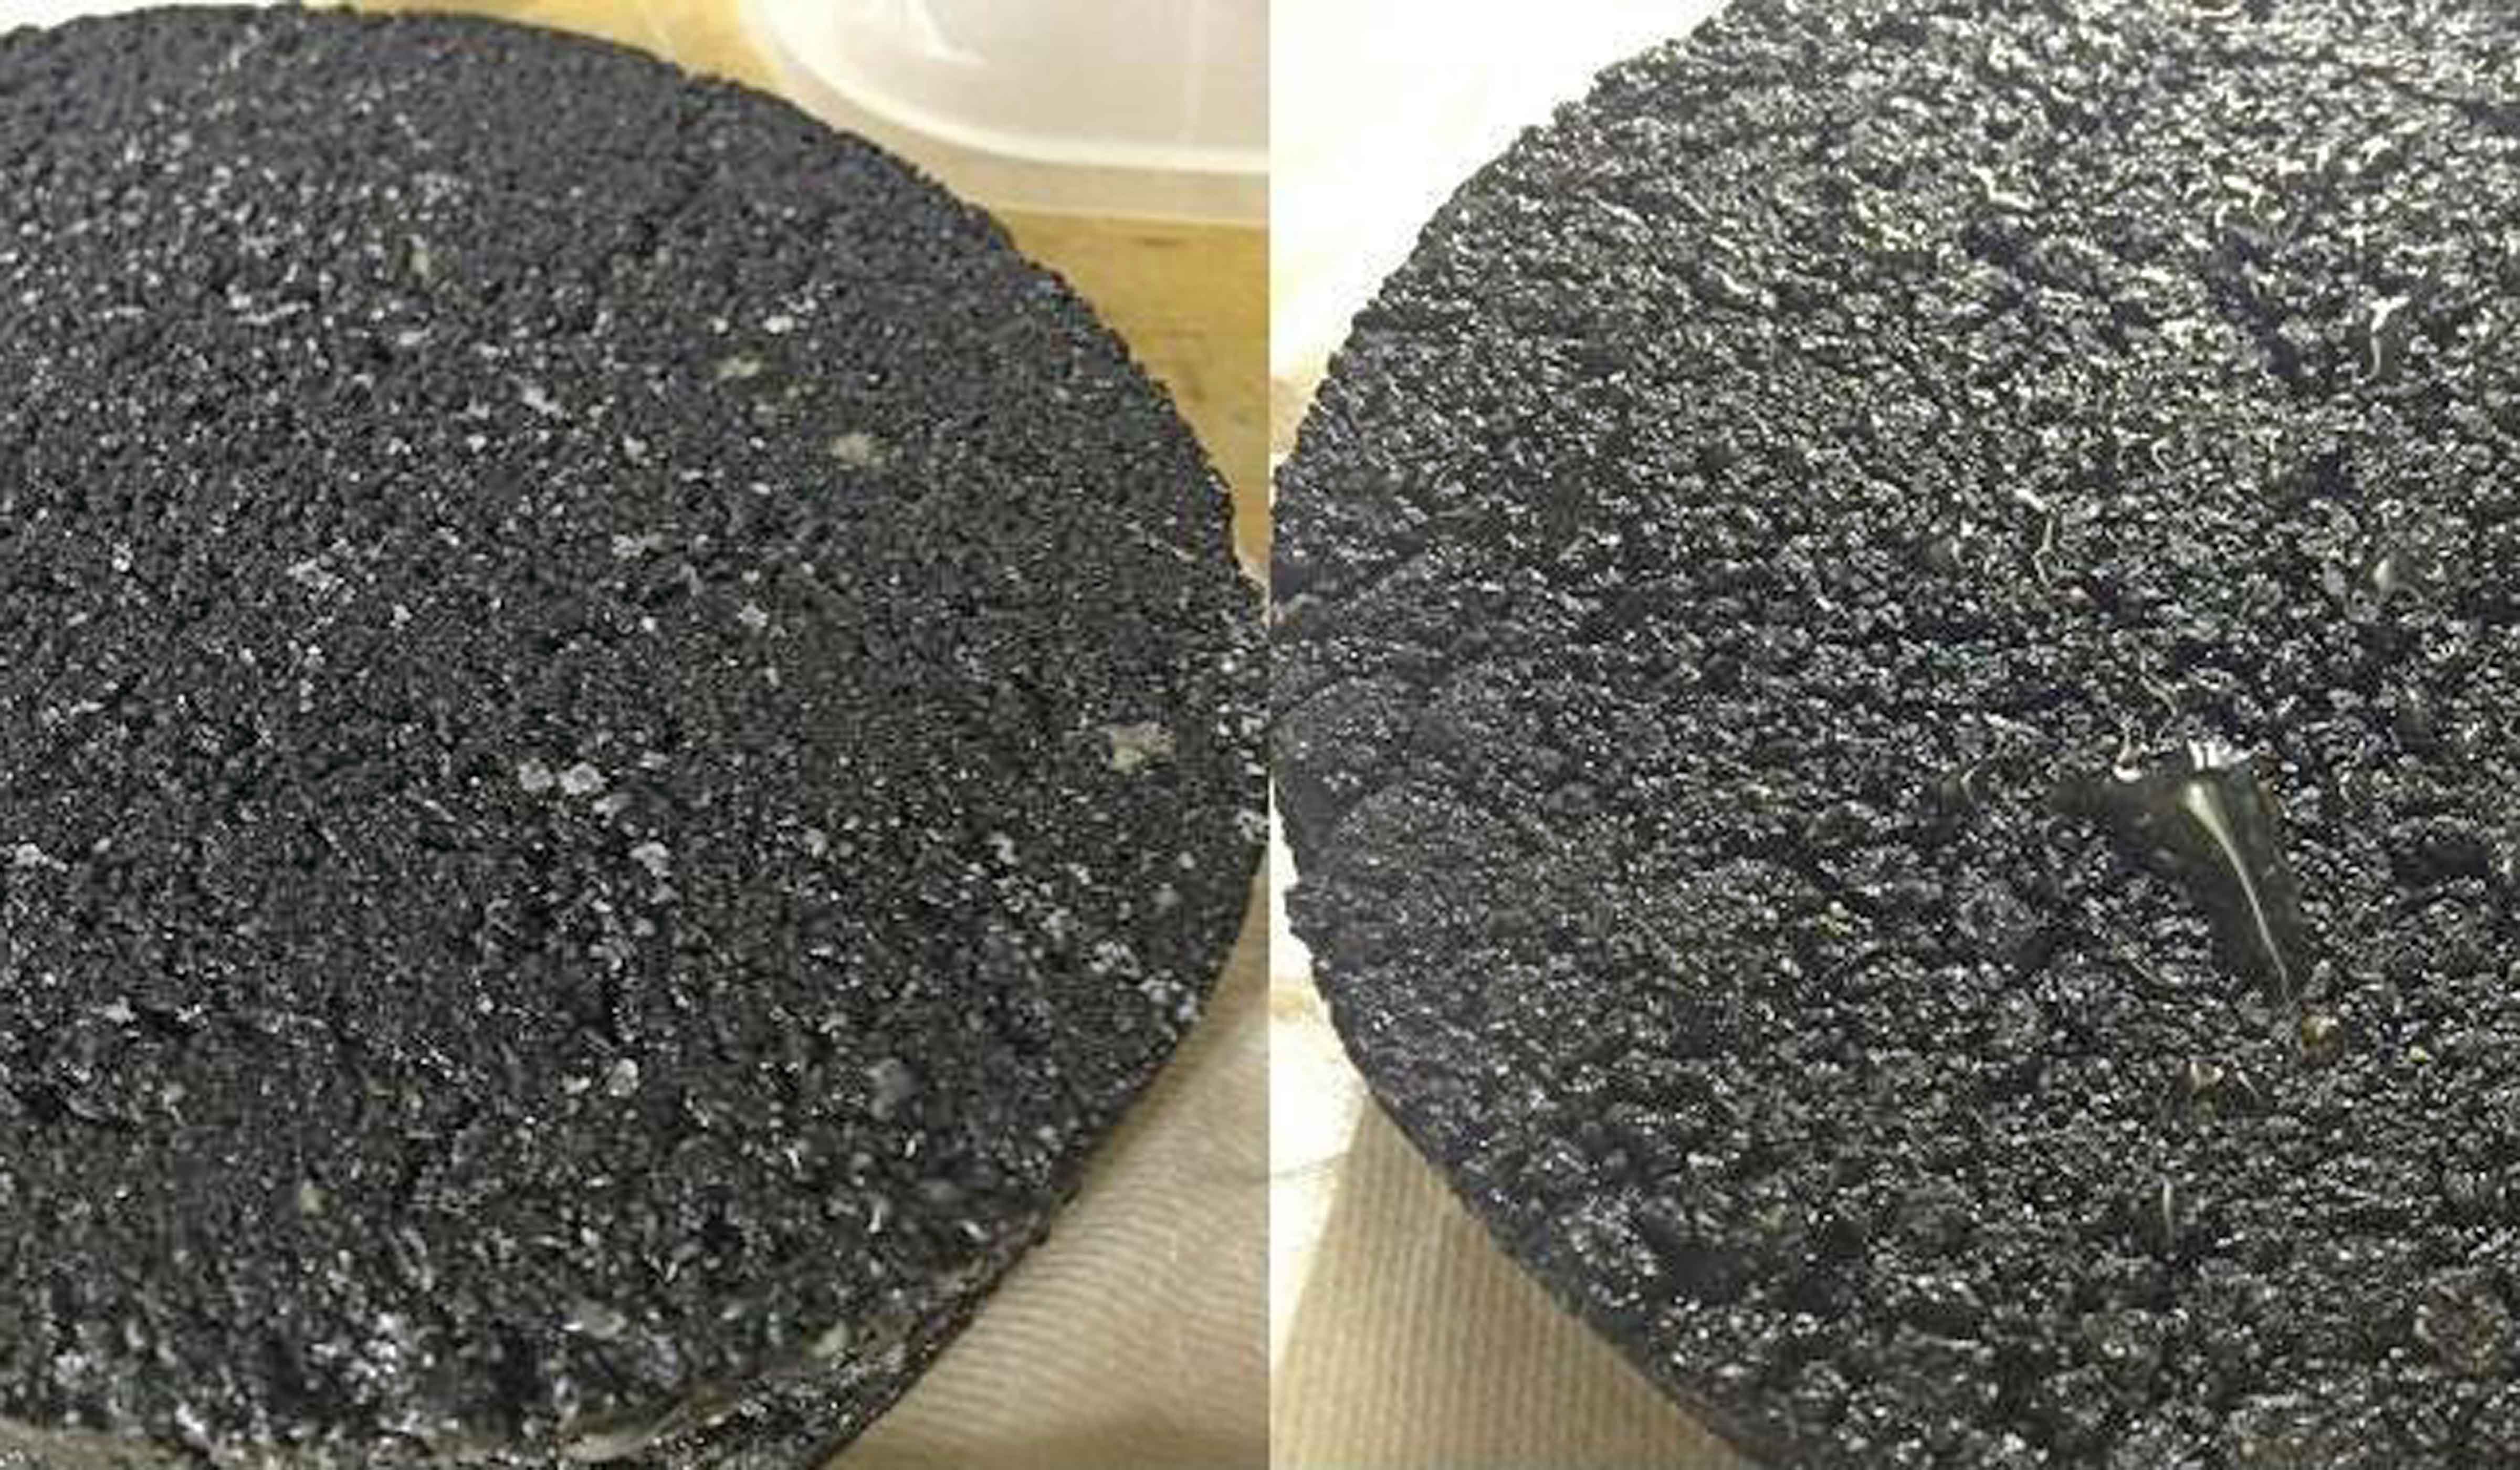 Photos hows two hot mix asphalt sample slices s are shown: on the left is the control after fog freezing, on the right the anti-icing sample.